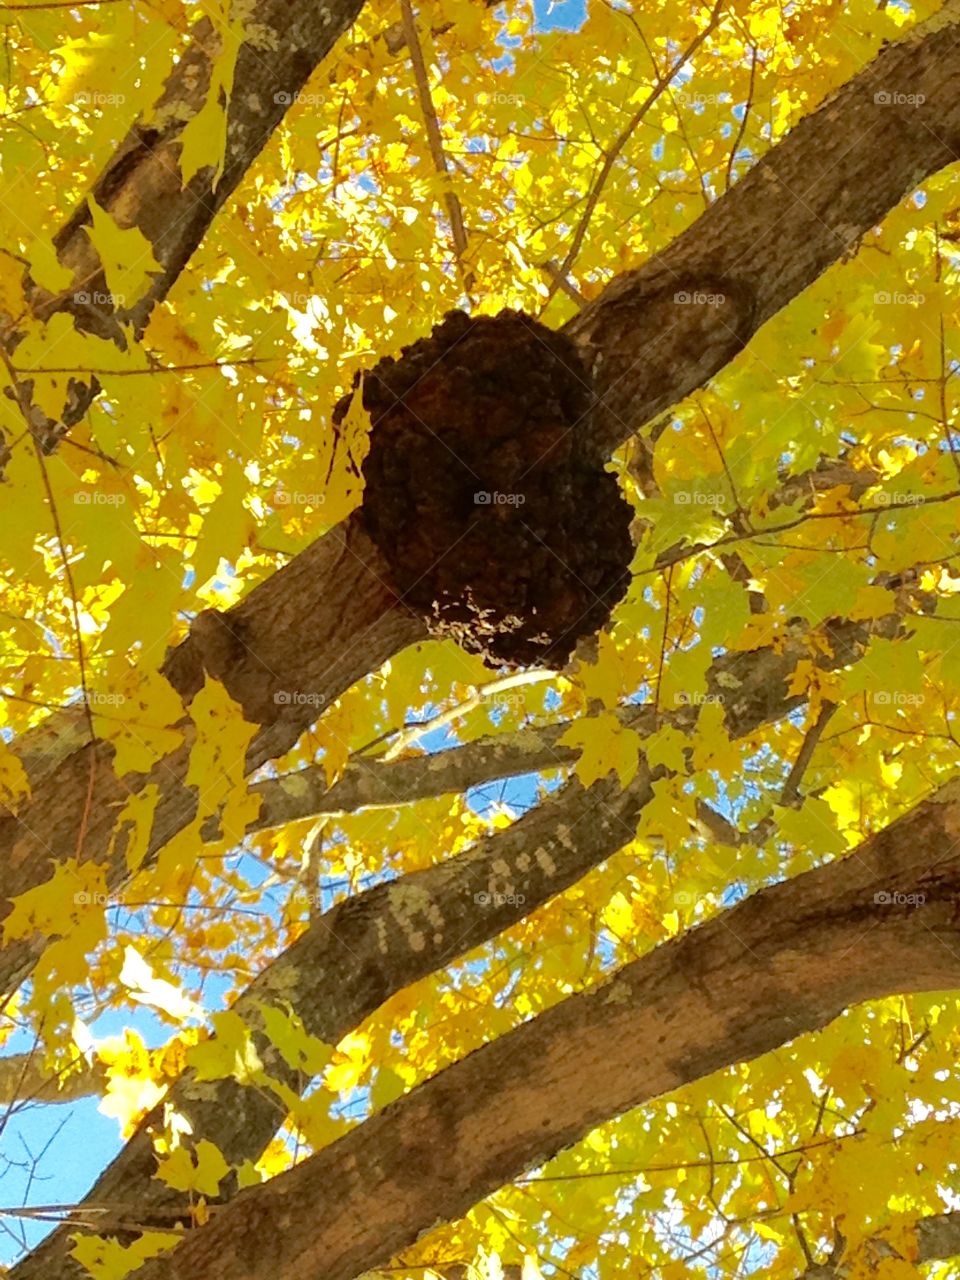 Tree Burl In Autumn. Easy to see in Fall & the sun shining. Took opportunity to get this great yellow leaf photo to show off the burl!